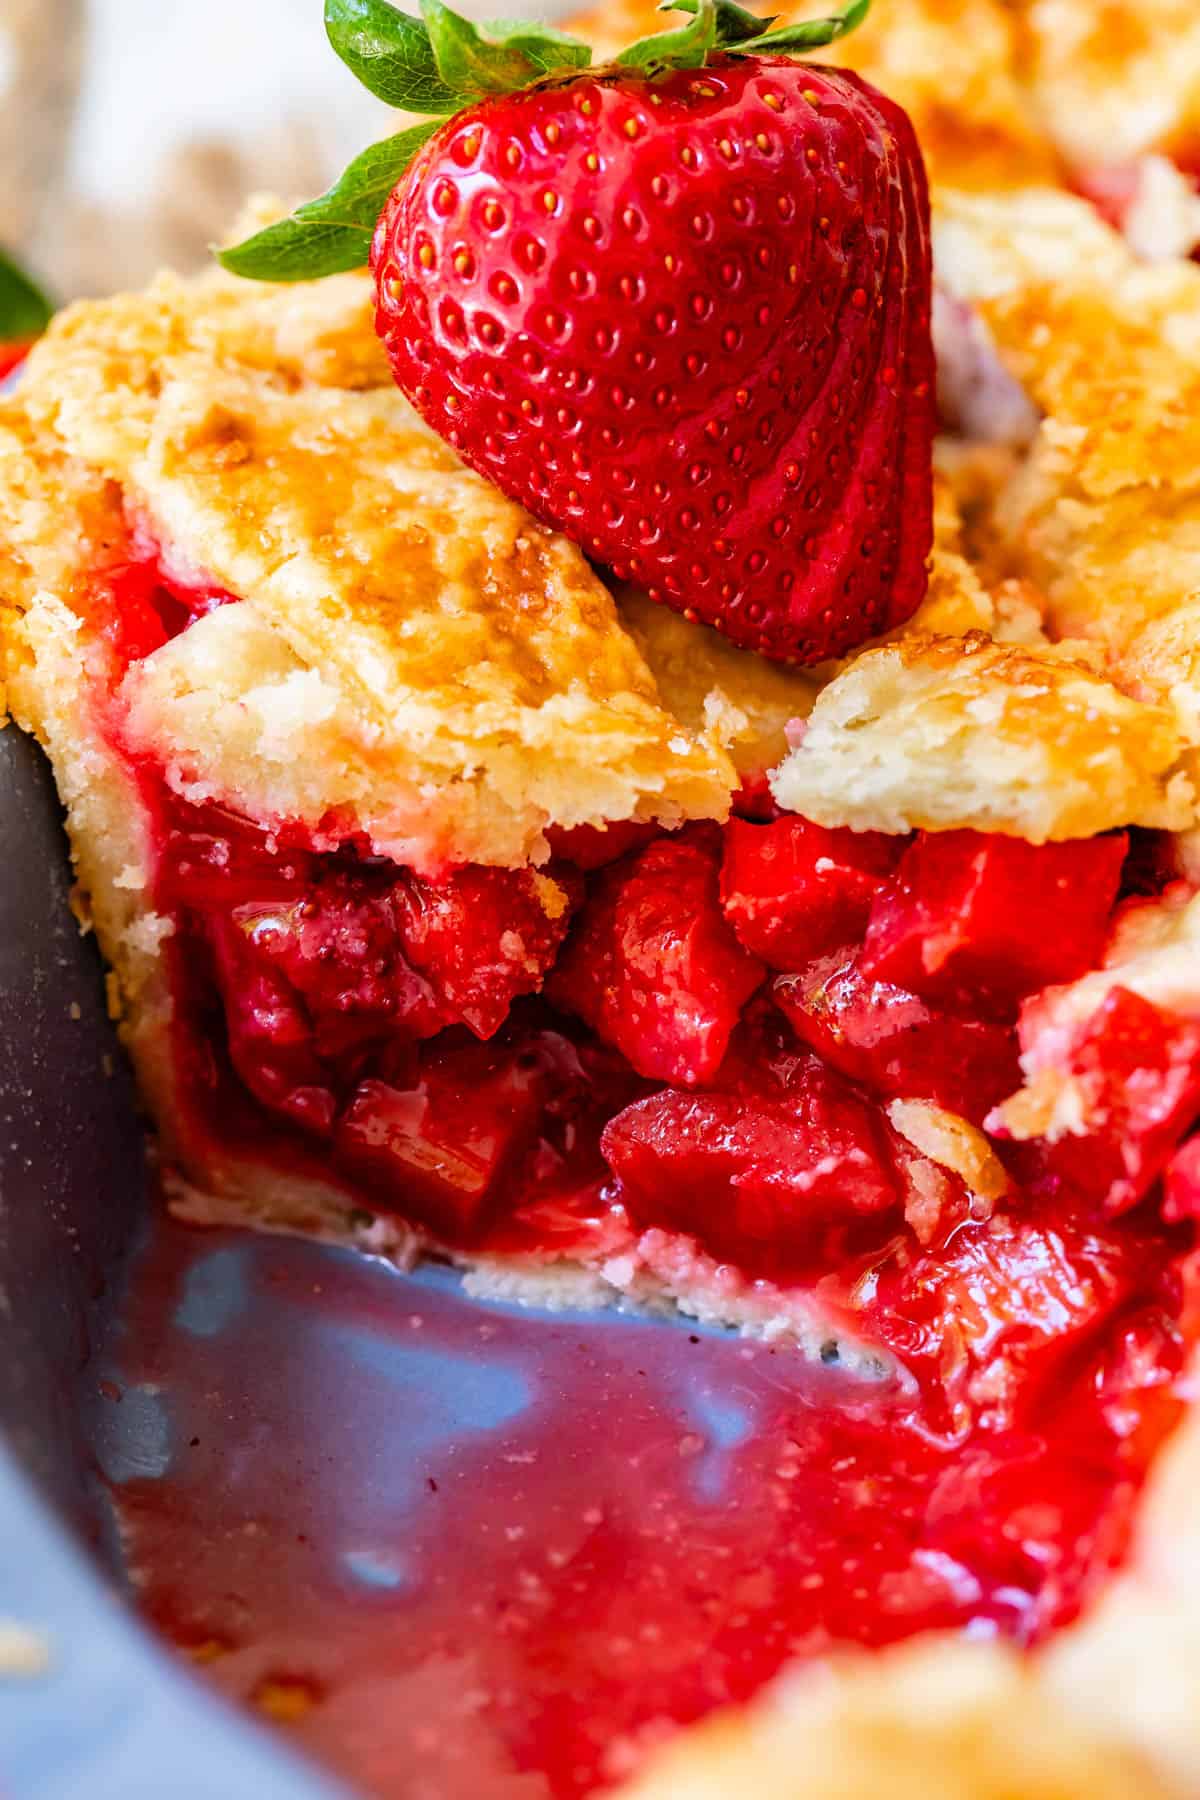 looking at the side of a piece of pie with all the strawberry and rhubarb filling showing.